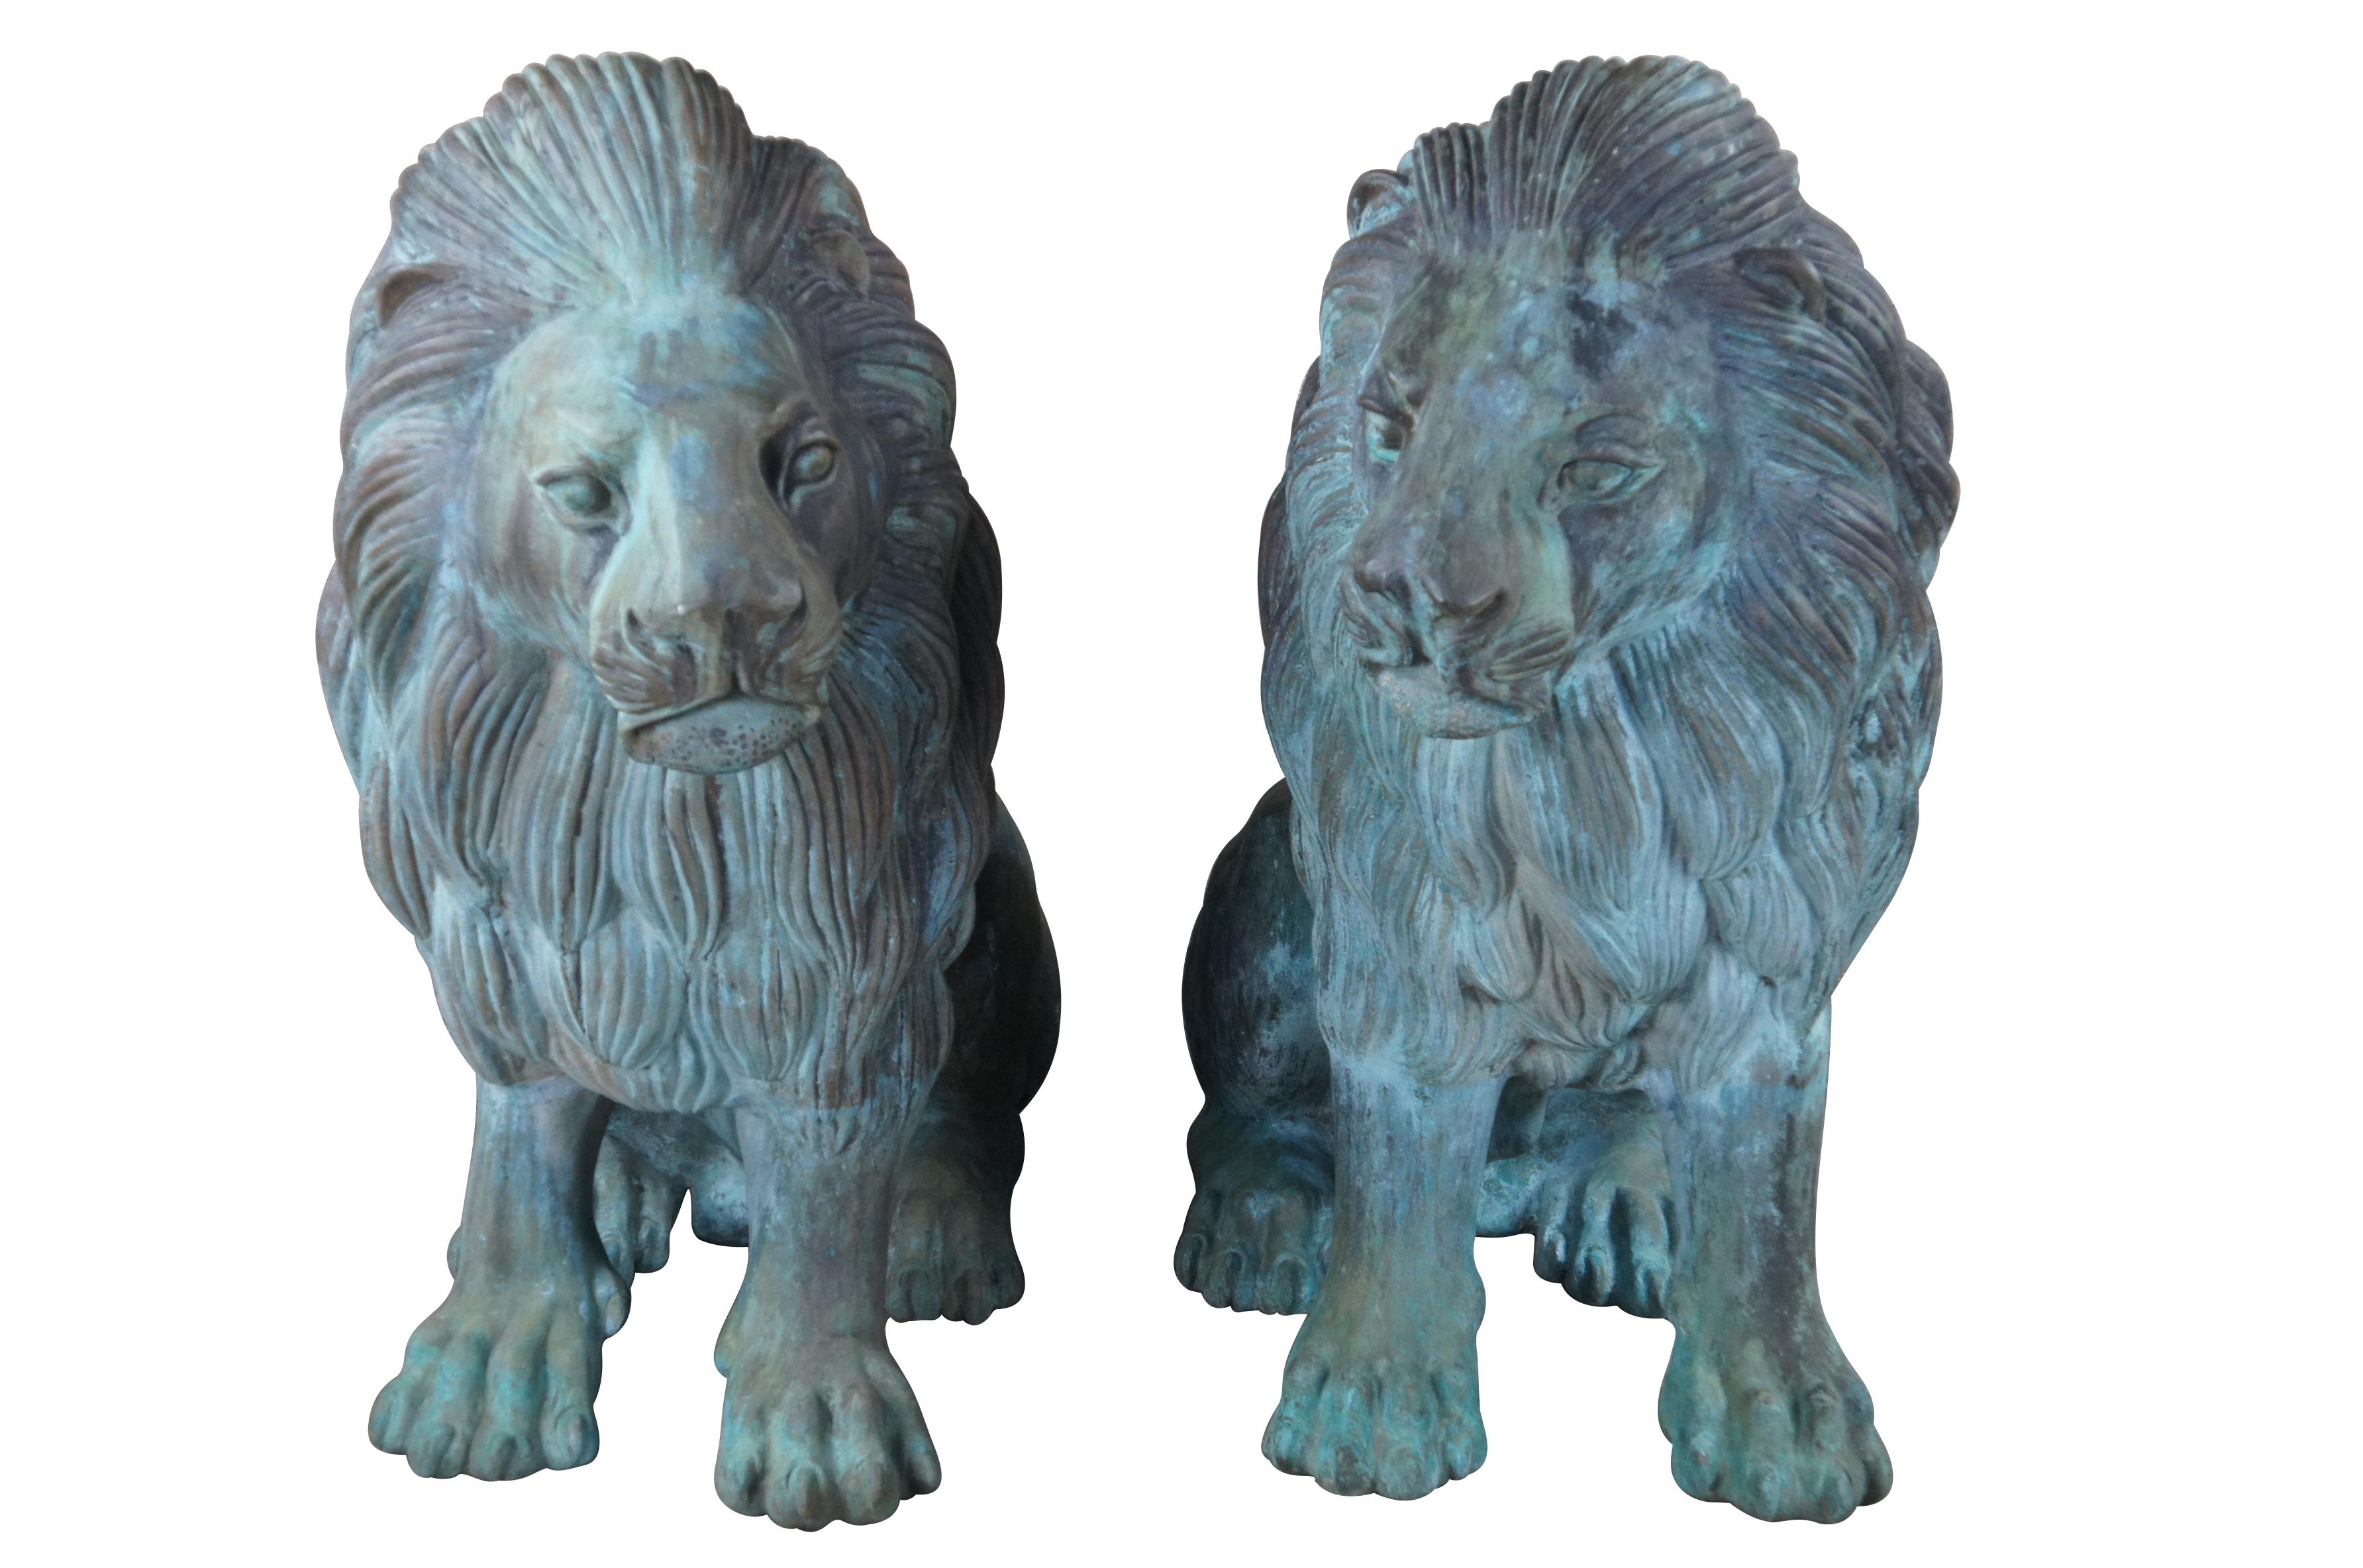 Two large and impressive entry gate lion statues.  This beautiful pair of left and right facing lions are made of cast bronze featuring heavy verdigris patina.  Their life like patina makes for a grand addition to any setting.  Suitable for Indoor